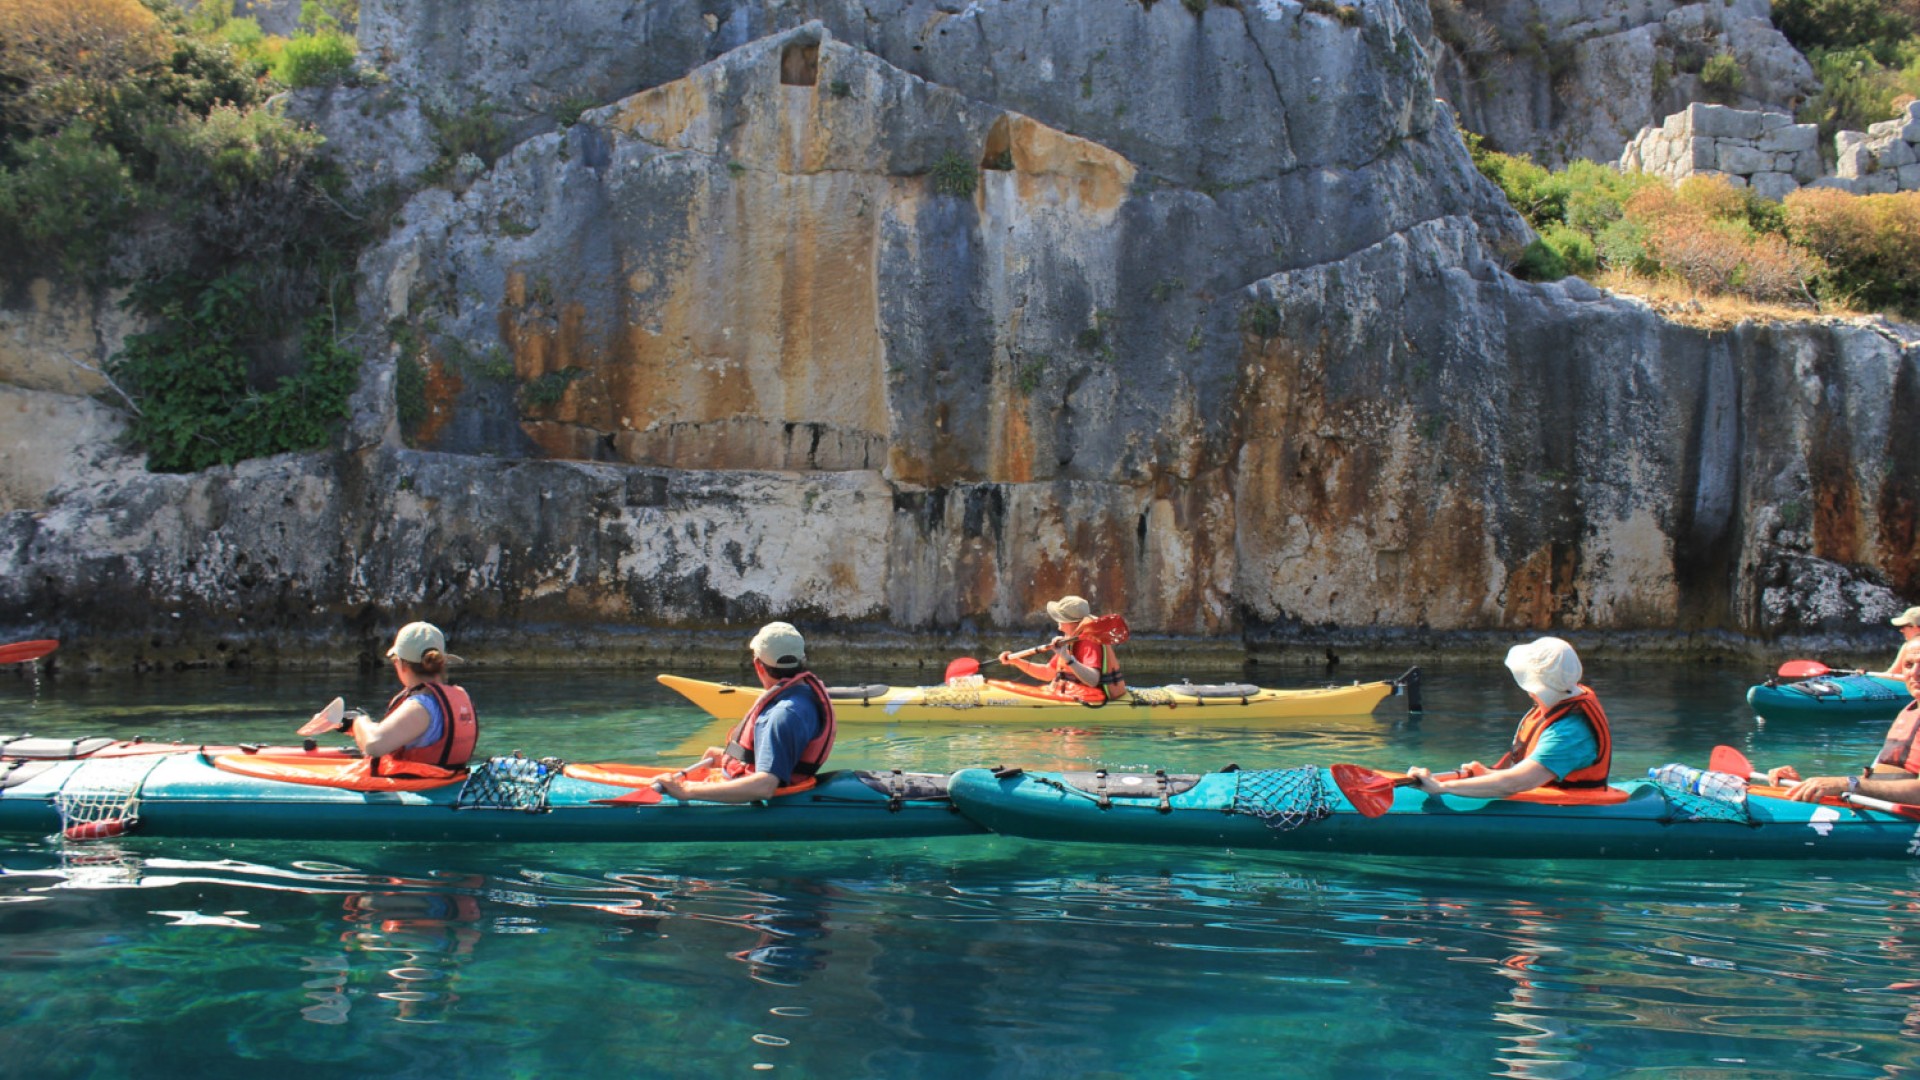 Side view of people sea kayaking atop turquoise waters next to a sheer rock face in Turkey